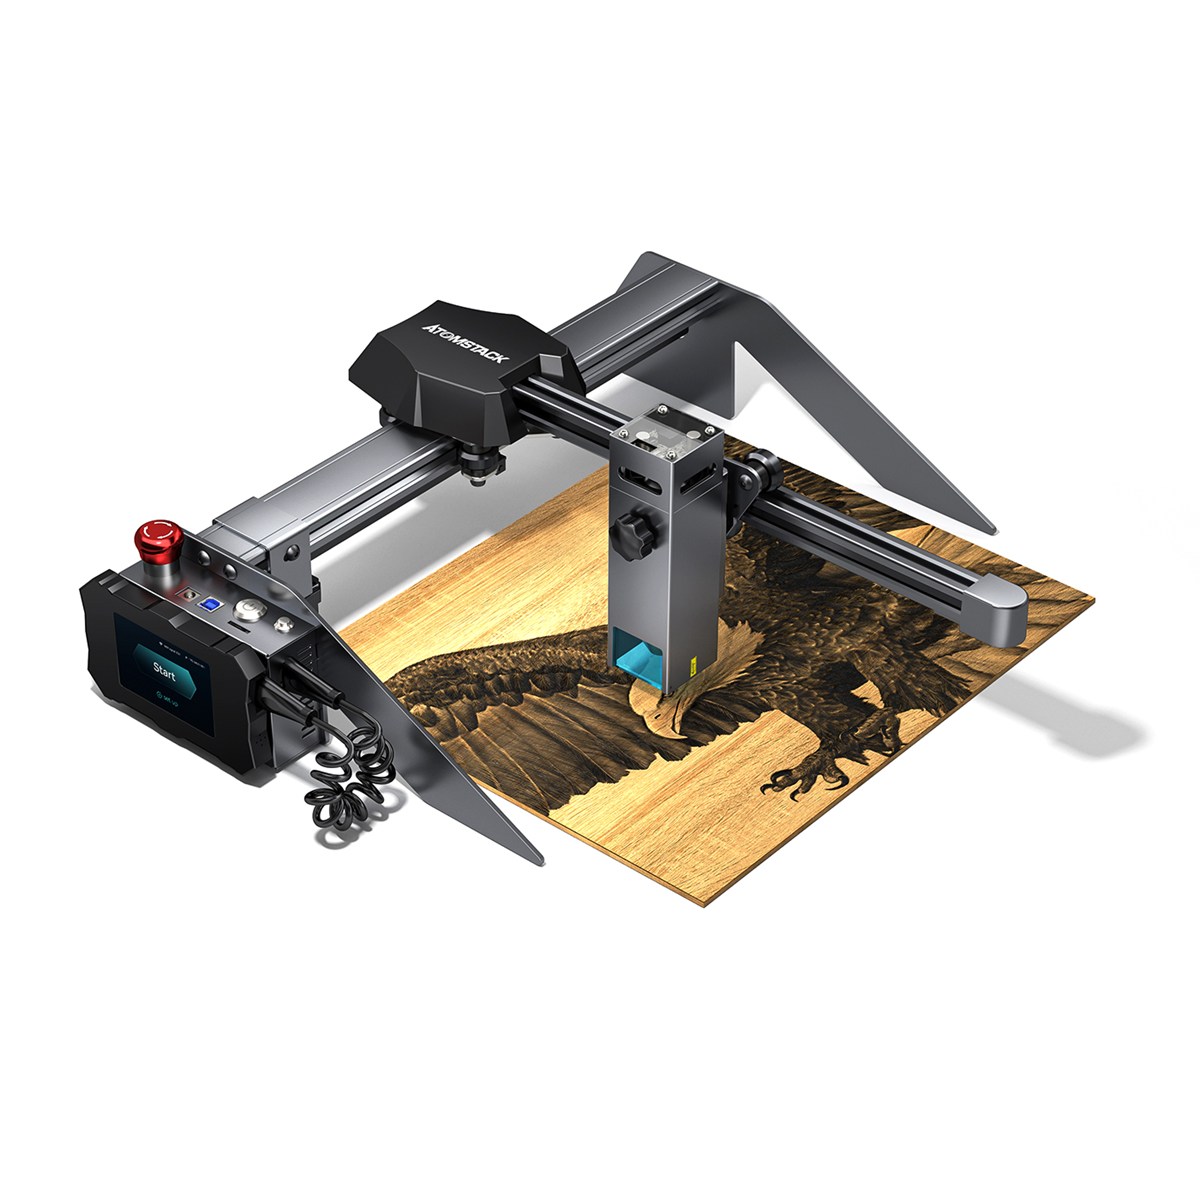 Find New ATOMSTACK P9 M50 Portable Dual Laser Engraving Cutting Machine 10W Output Power DIY Laser Engraver 304 Mirror Stainless Steel Engraving Support Offline Engraving 20mm Wood Cutting 15mm Acrylic Cutting for Sale on Gipsybee.com with cryptocurrencies